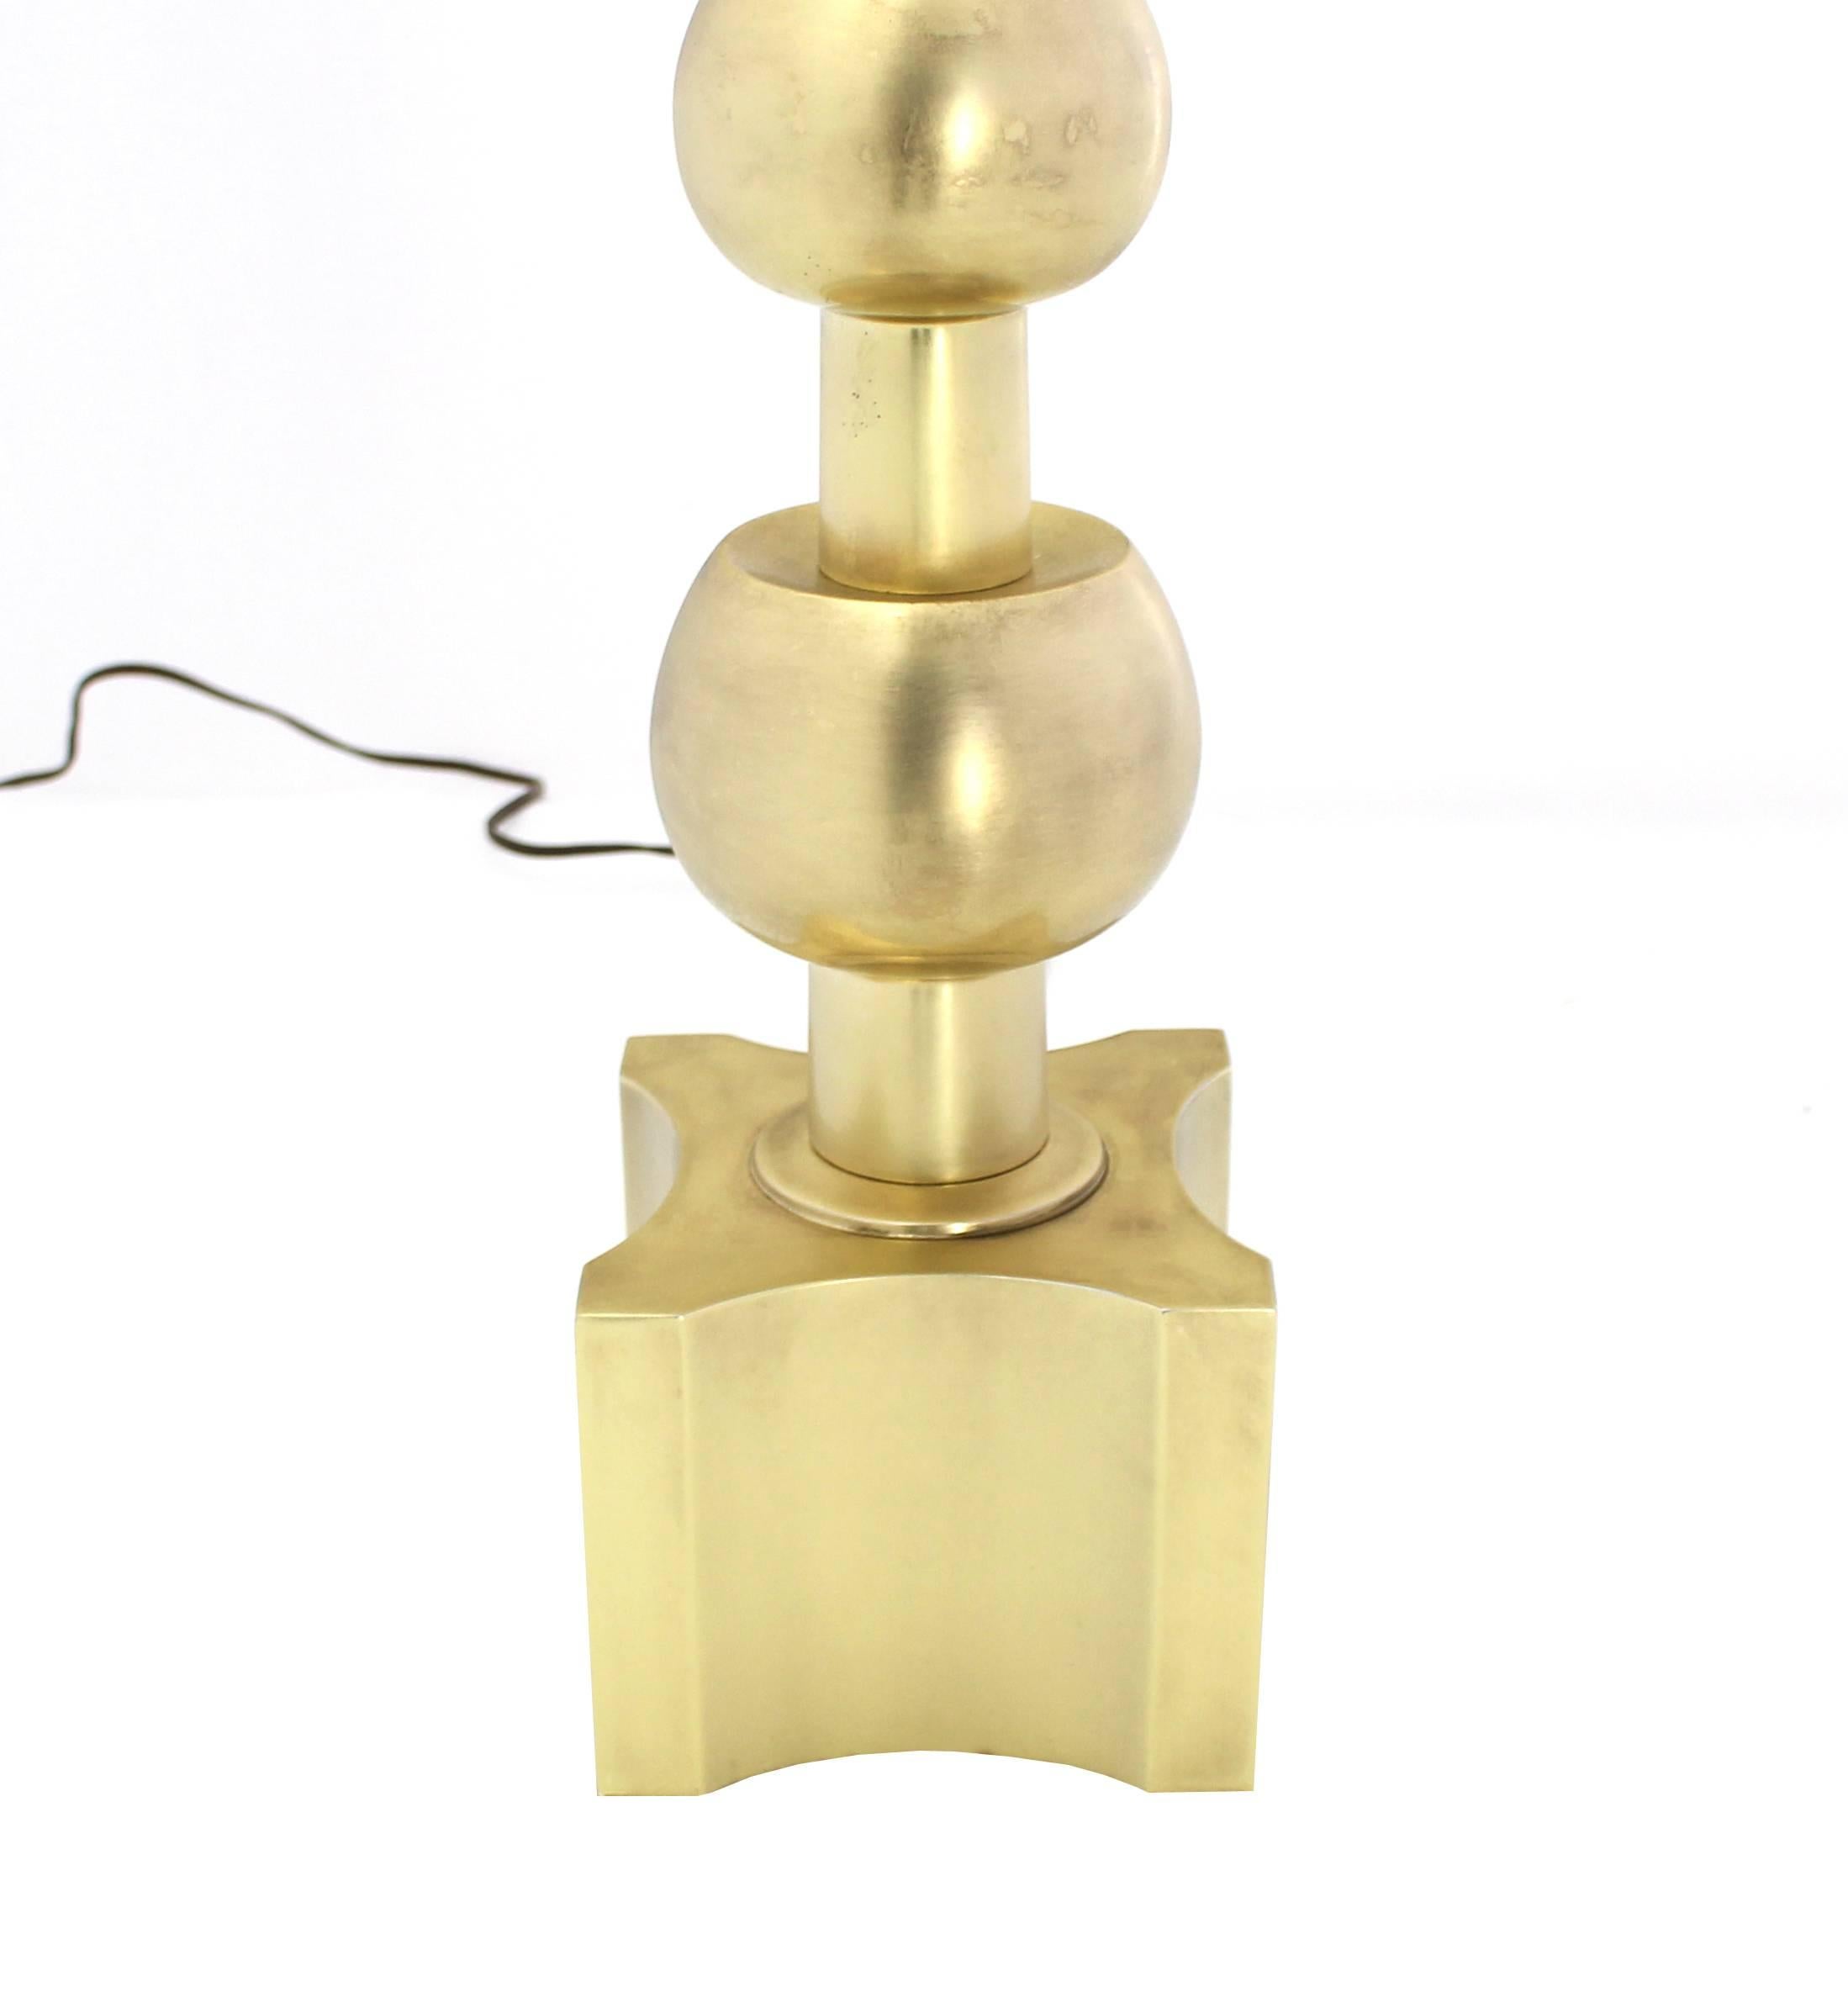 Plated Stiffel Brass Table Lamp Mid Century Modern Stacked Orbits Jacks Base Pattern For Sale